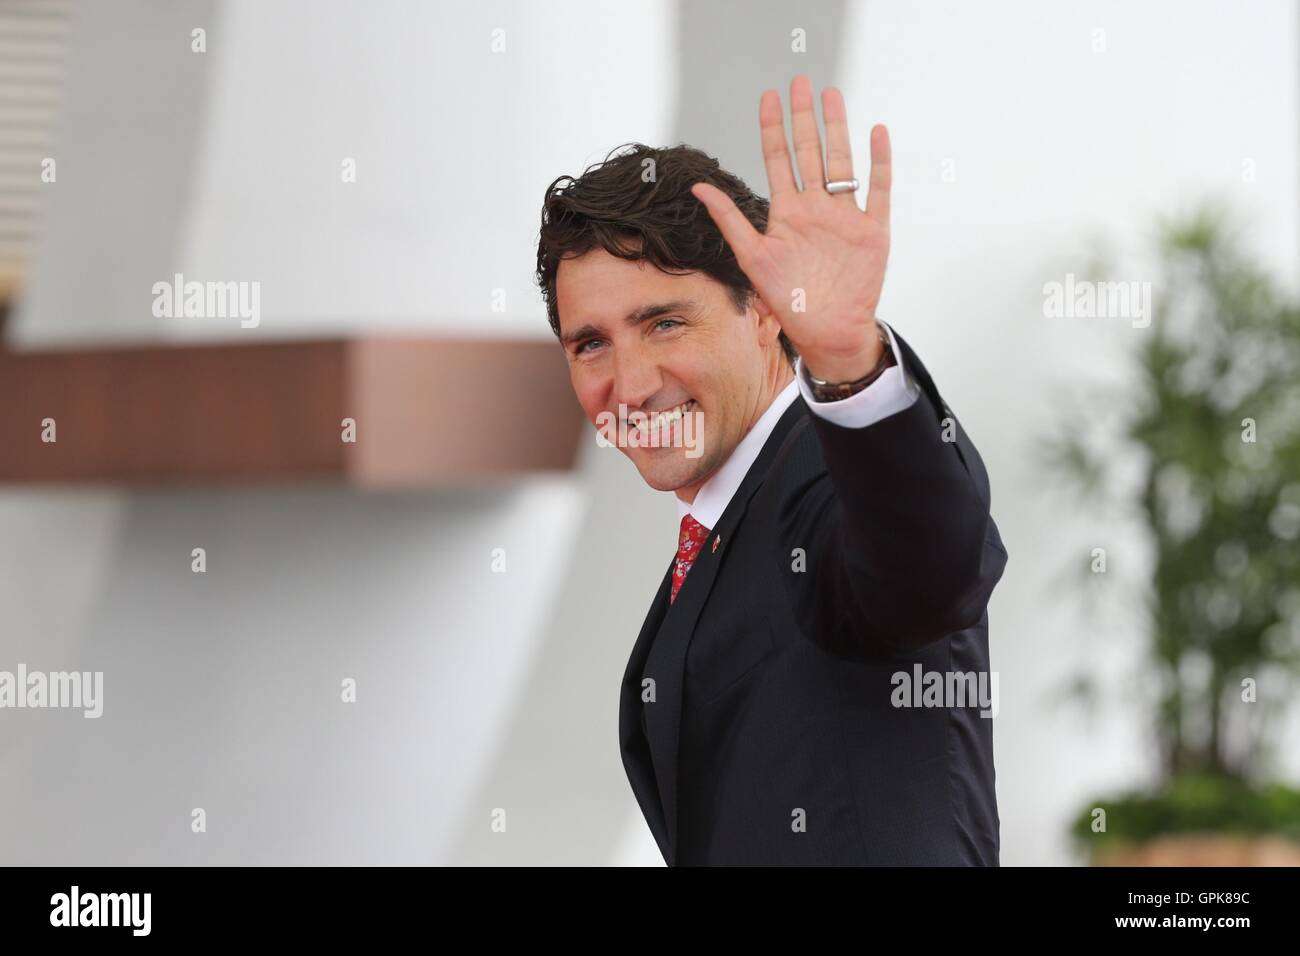 (160904) -- HANGZHOU, Sept. 4, 2016 (Xinhua) -- Canadian Prime Minister Justin Trudeau arrives at Hangzhou International Expo Center to attend the G20 summit in Hangzhou, capital of east China's Zhejiang Province, Sept. 4, 2016. The 11th G20 summit opened here on Sunday. (Xinhua/Xing Guangli)(mcg) Stock Photo